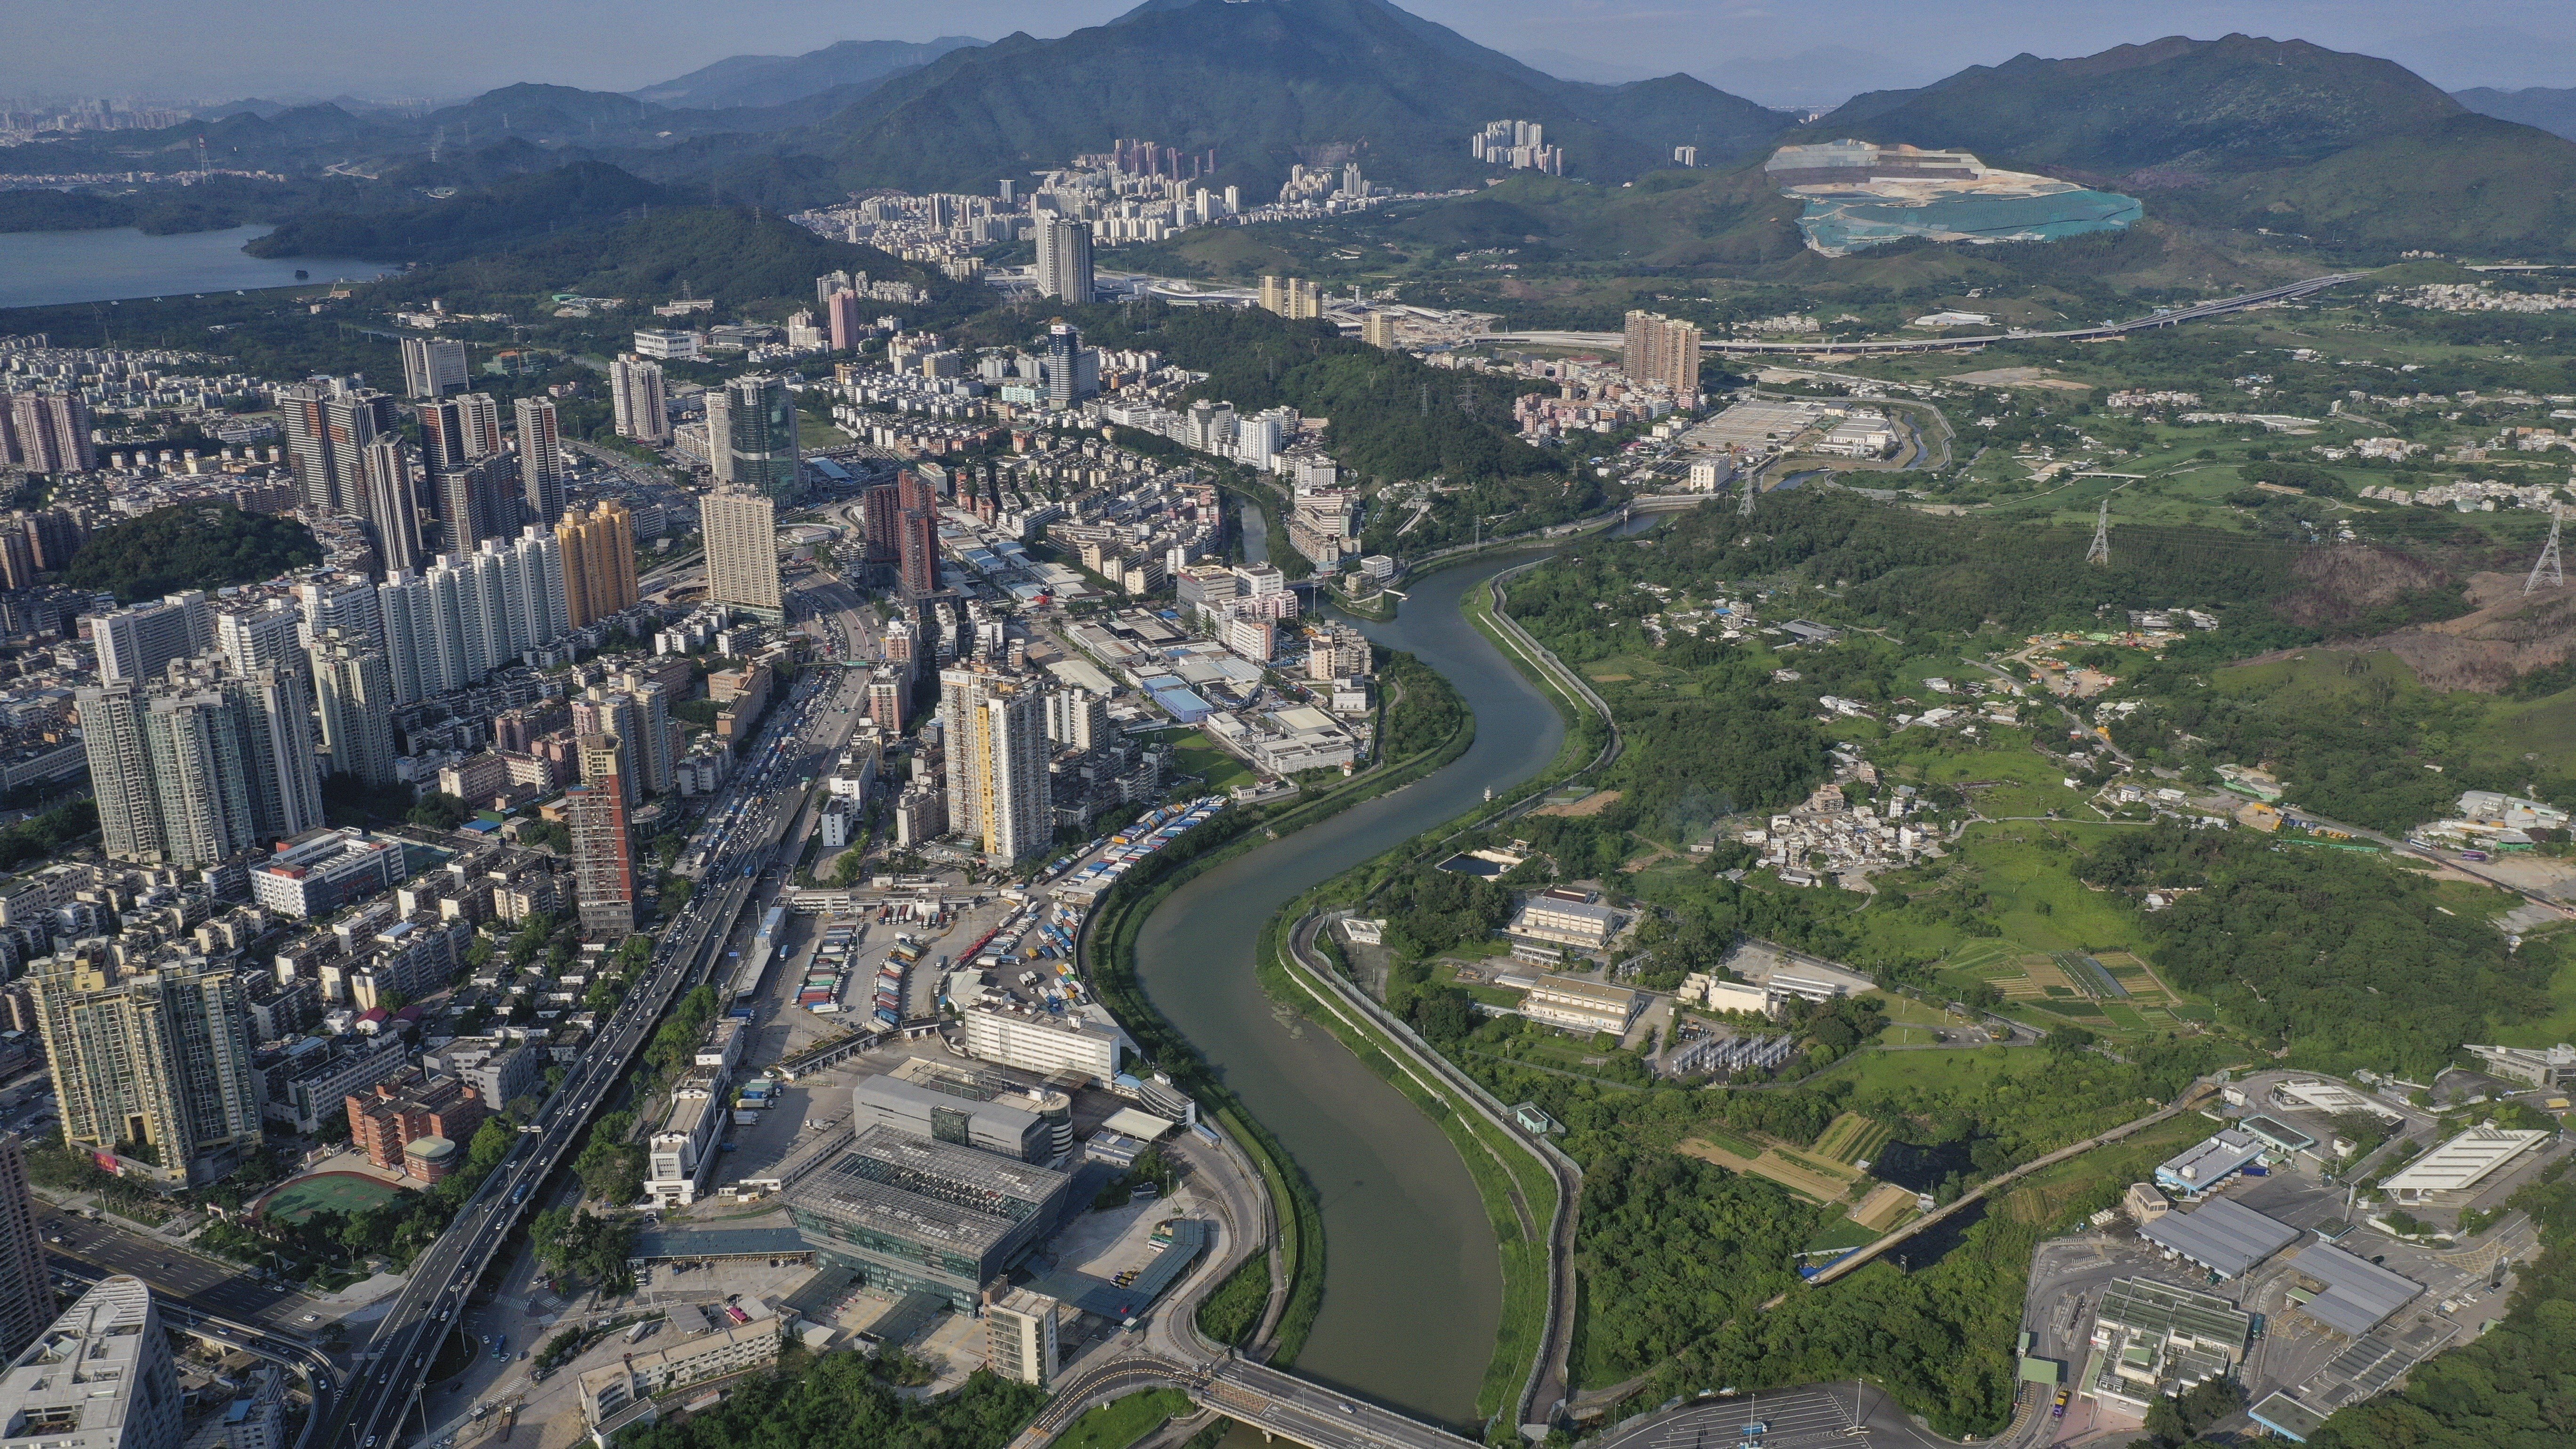 The Northern Metropolis is intended to serve as a strategic growth engine for Hong Kong’s border area with mainland China. Photo: Martin Chan